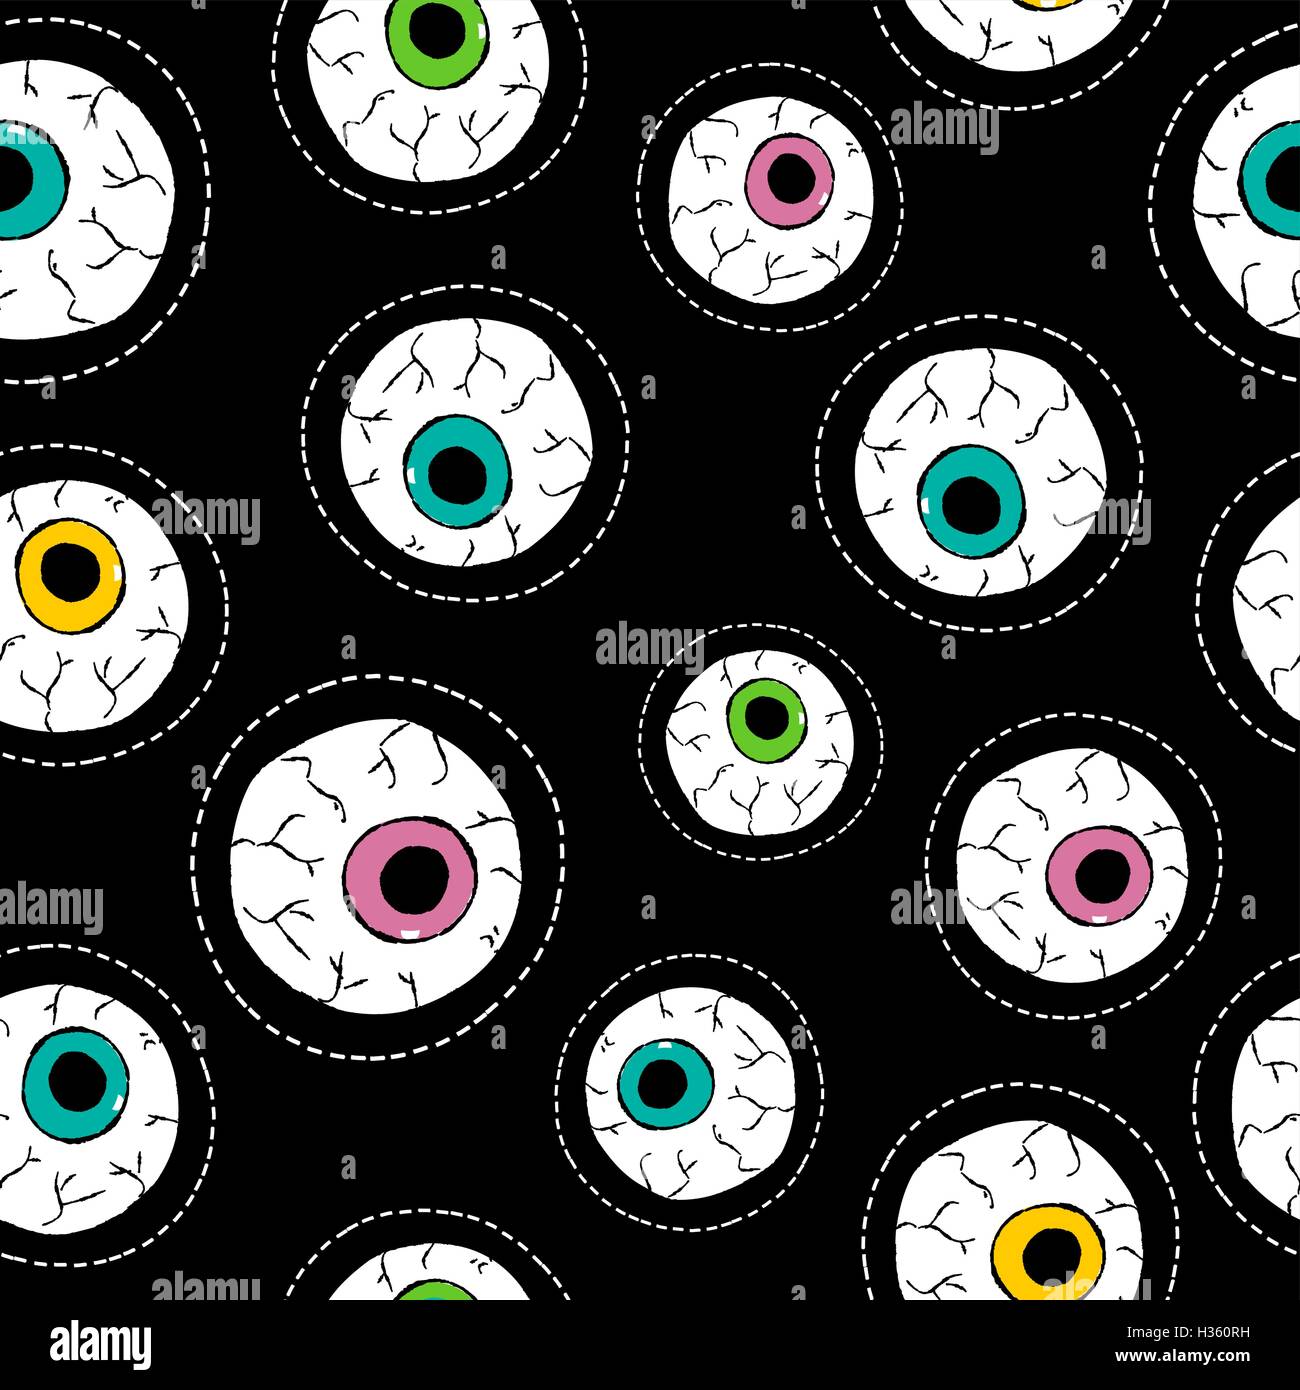 Hand drawn eyeball seamless pattern with human eye stitch patch icons in vibrant color. EPS10 vector. Stock Vector